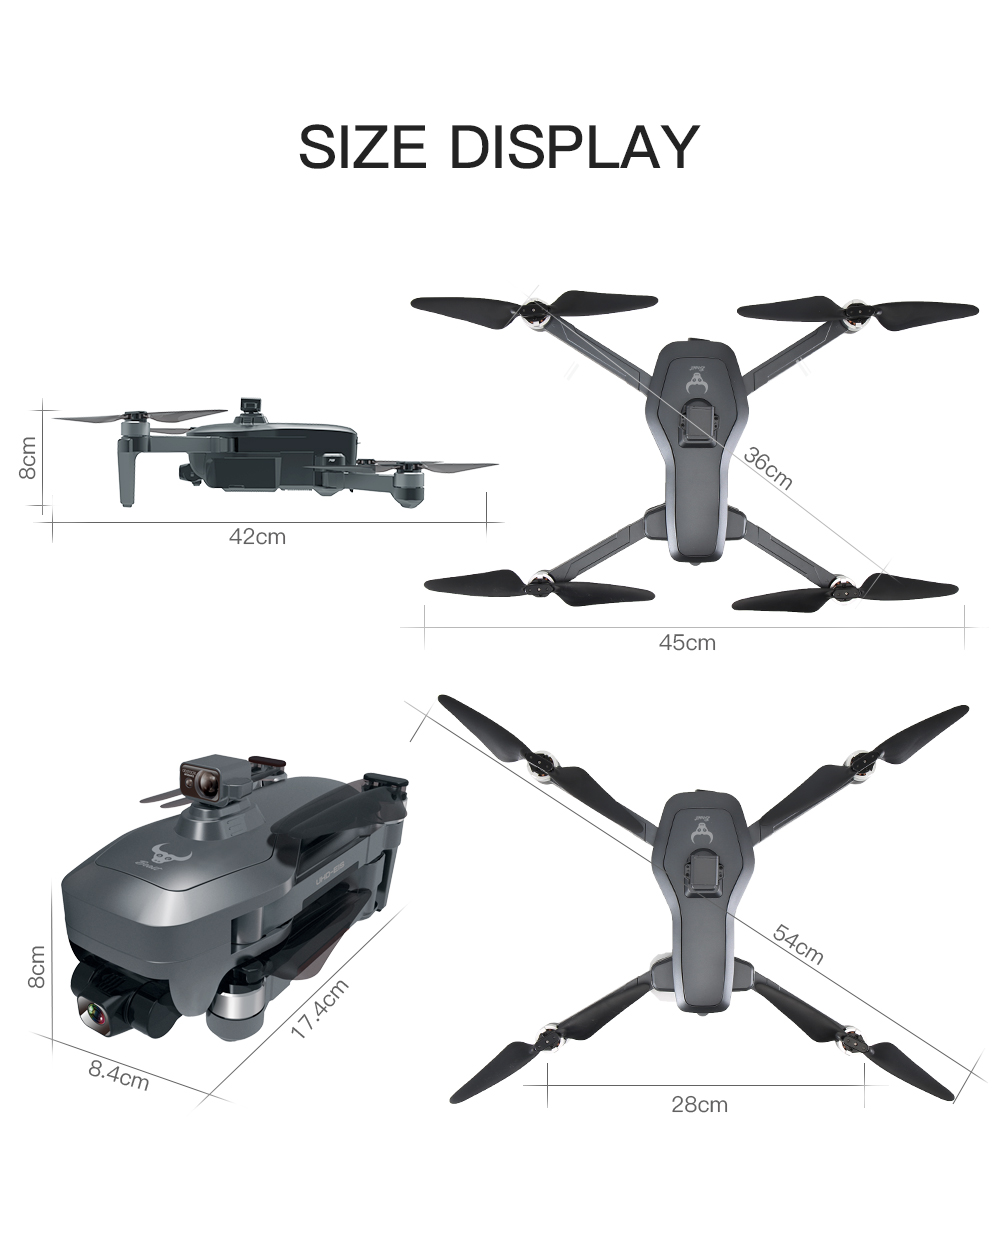 ZLL SG906 MAX GPS 5G WIFI FPV With 4K HD Camera 3-Axis EIS Anti-shake Gimbal Obstacle Avoidance Brushless Foldable RC Drone Quadcopter RTF 29